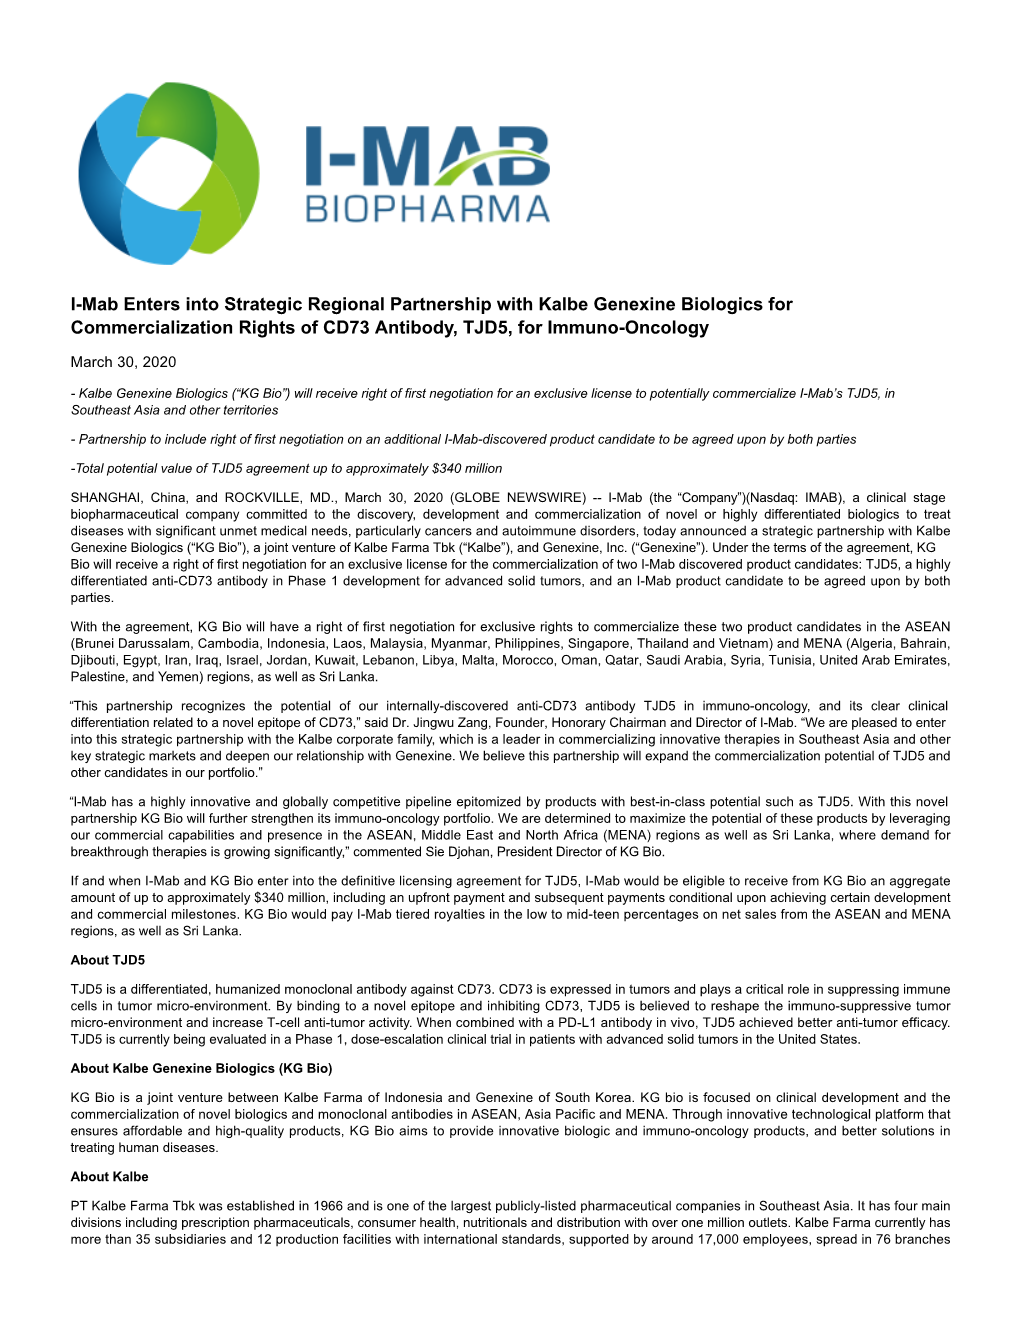 I-Mab Enters Into Strategic Regional Partnership with Kalbe Genexine Biologics for Commercialization Rights of CD73 Antibody, TJD5, for Immuno-Oncology